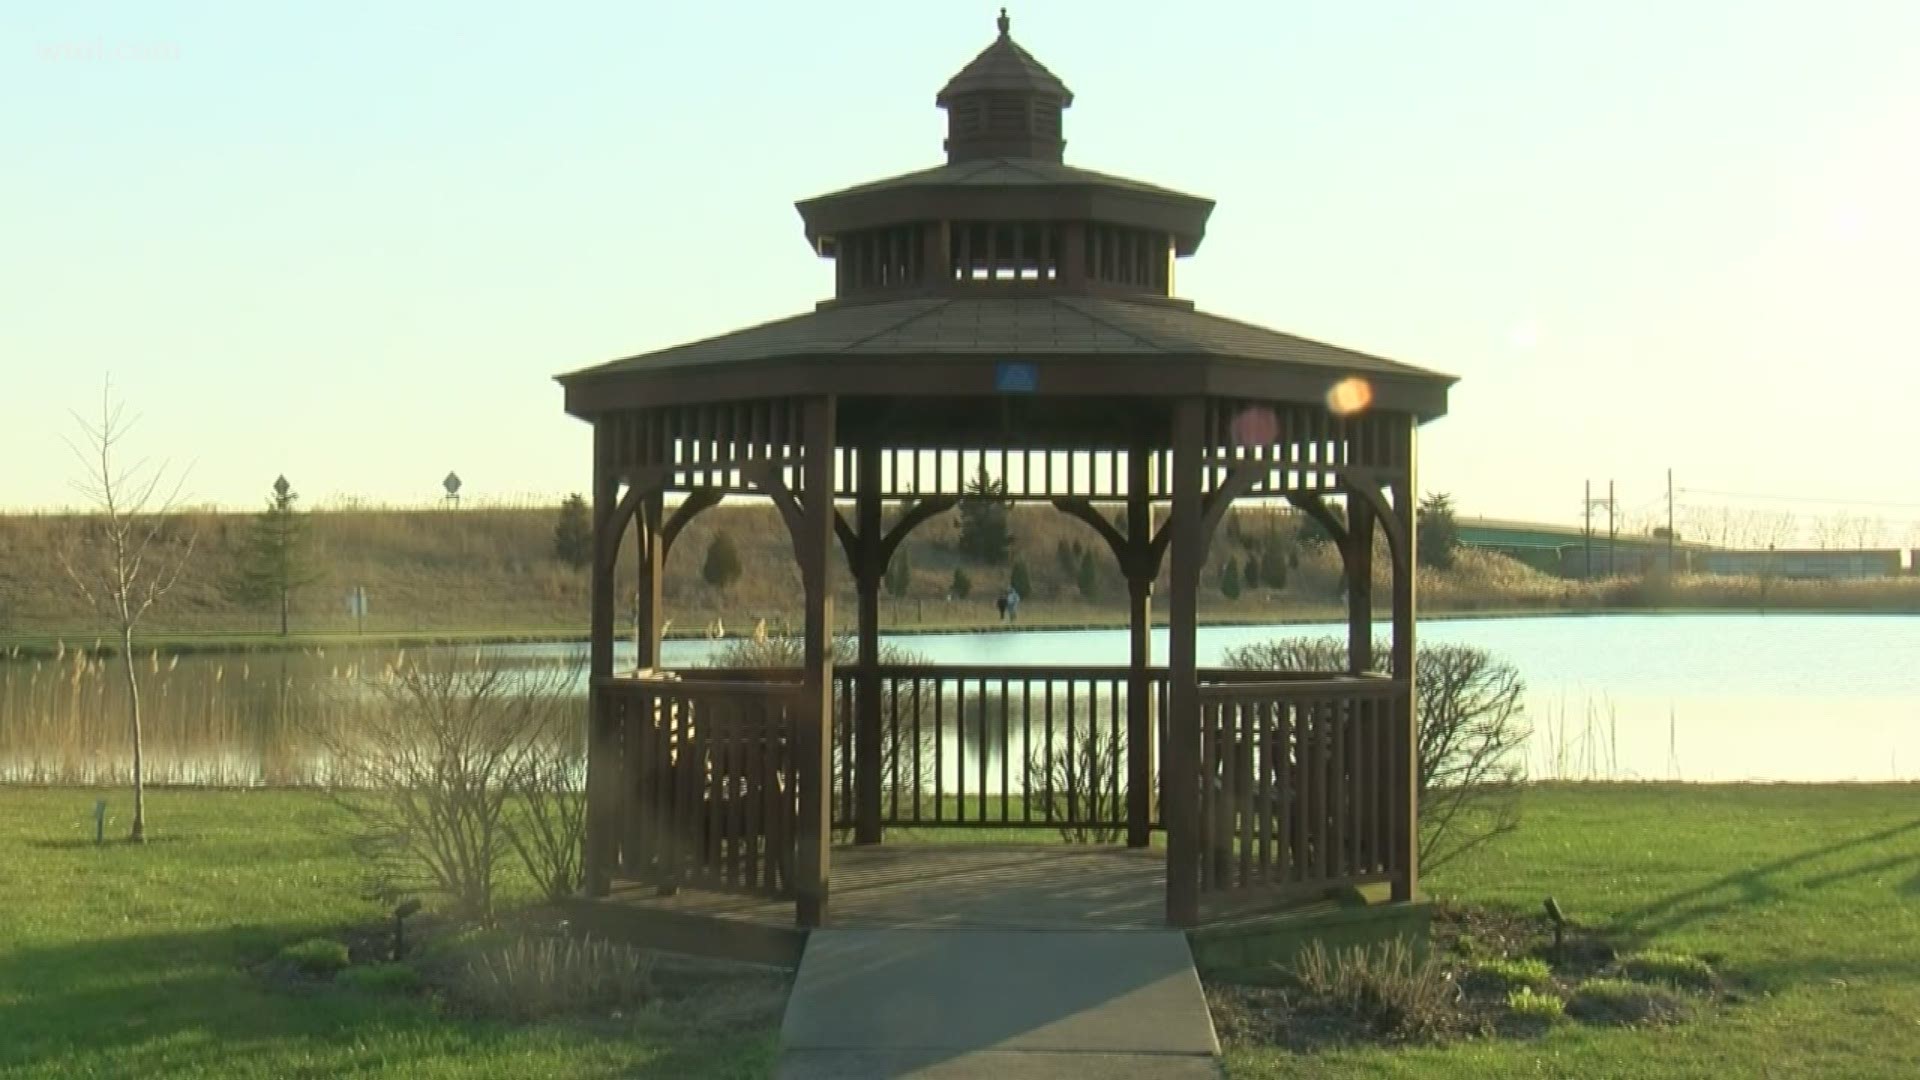 Because right now, we need it: The sights and sounds of nature at Friendship Park, captured by WTOL 11 photojournalist Aliyah Coates.